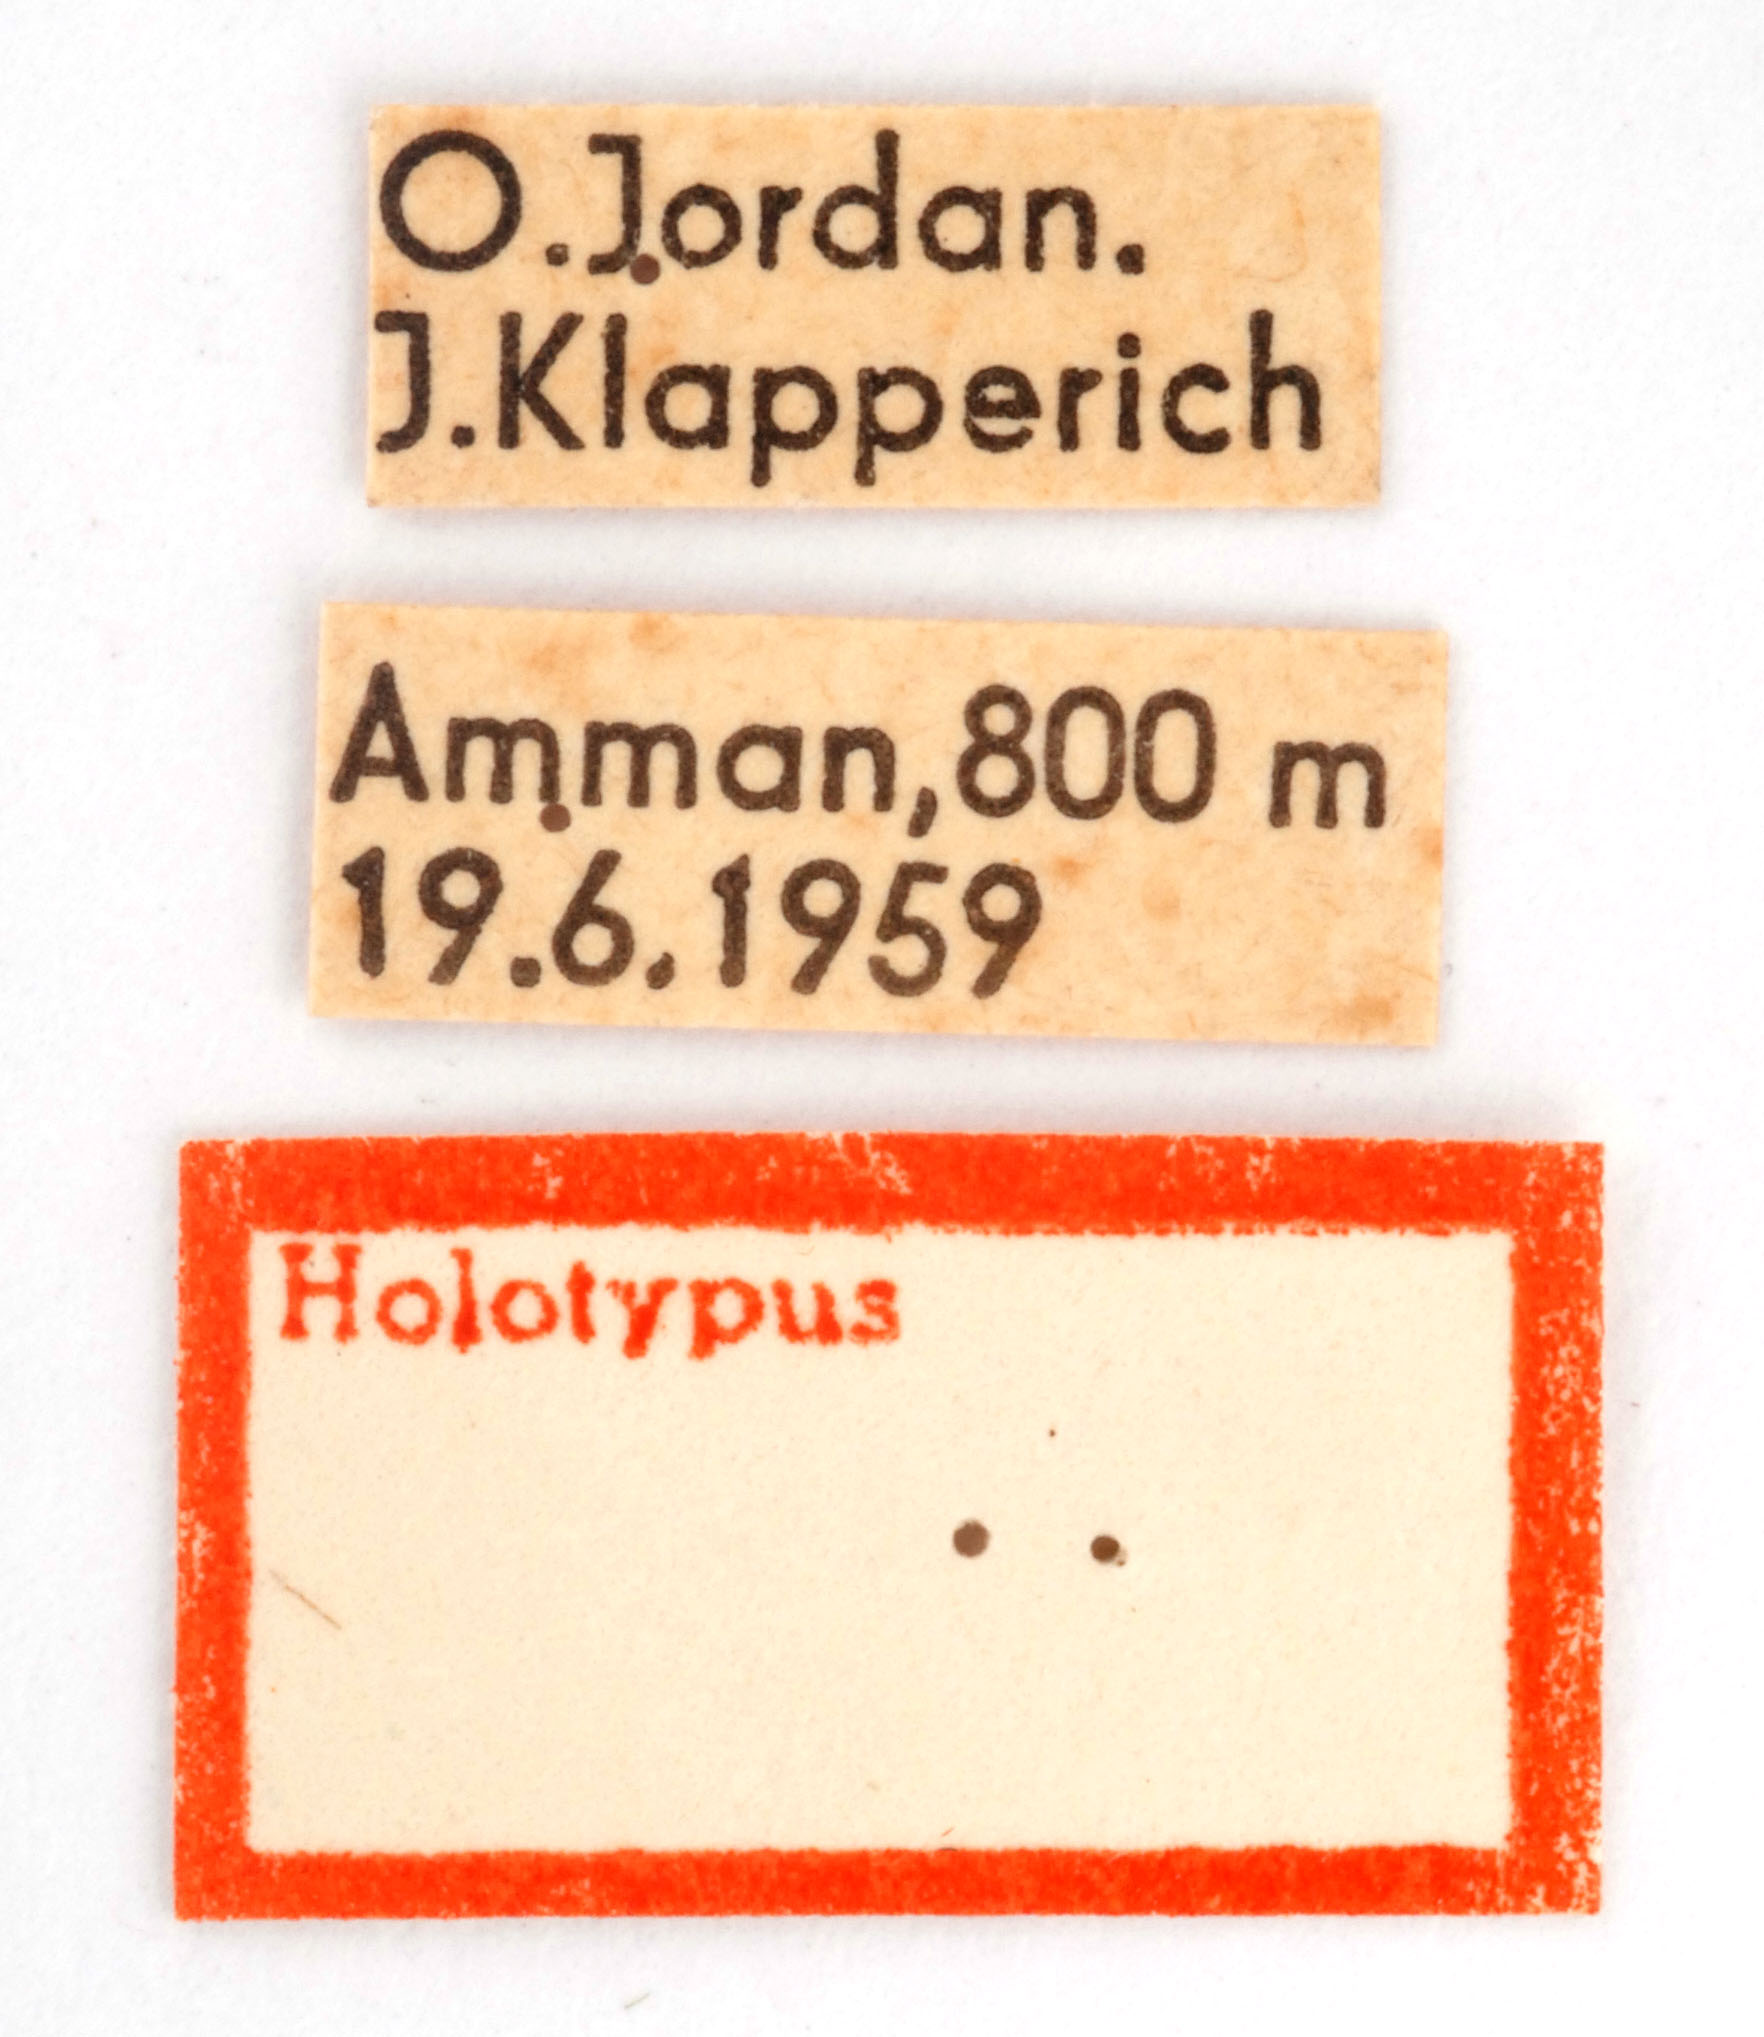 labels (holotype). Depicts CollectionObject 1476262; 036a95d1-f52f-48f8-a154-306b4cf710f5, a CollectionObject.